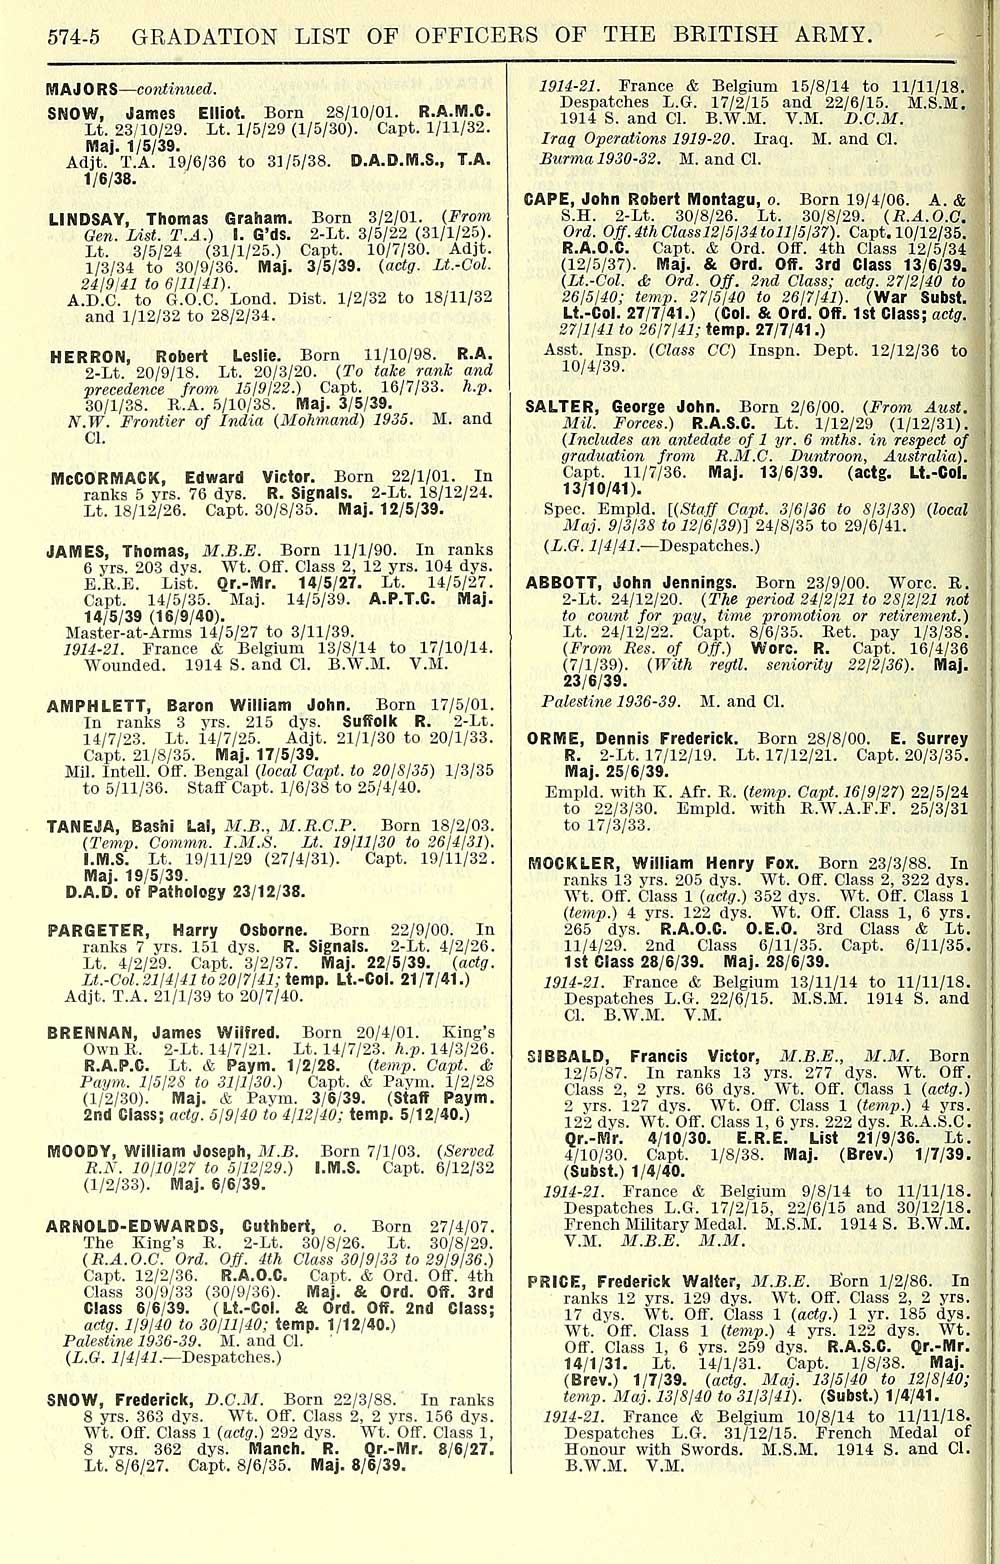 438 Army Lists Half Yearly Army Lists 1923 Feb 1950 From 1947 Annual Despite The Name 1941 Second Half British Military Lists National Library Of Scotland